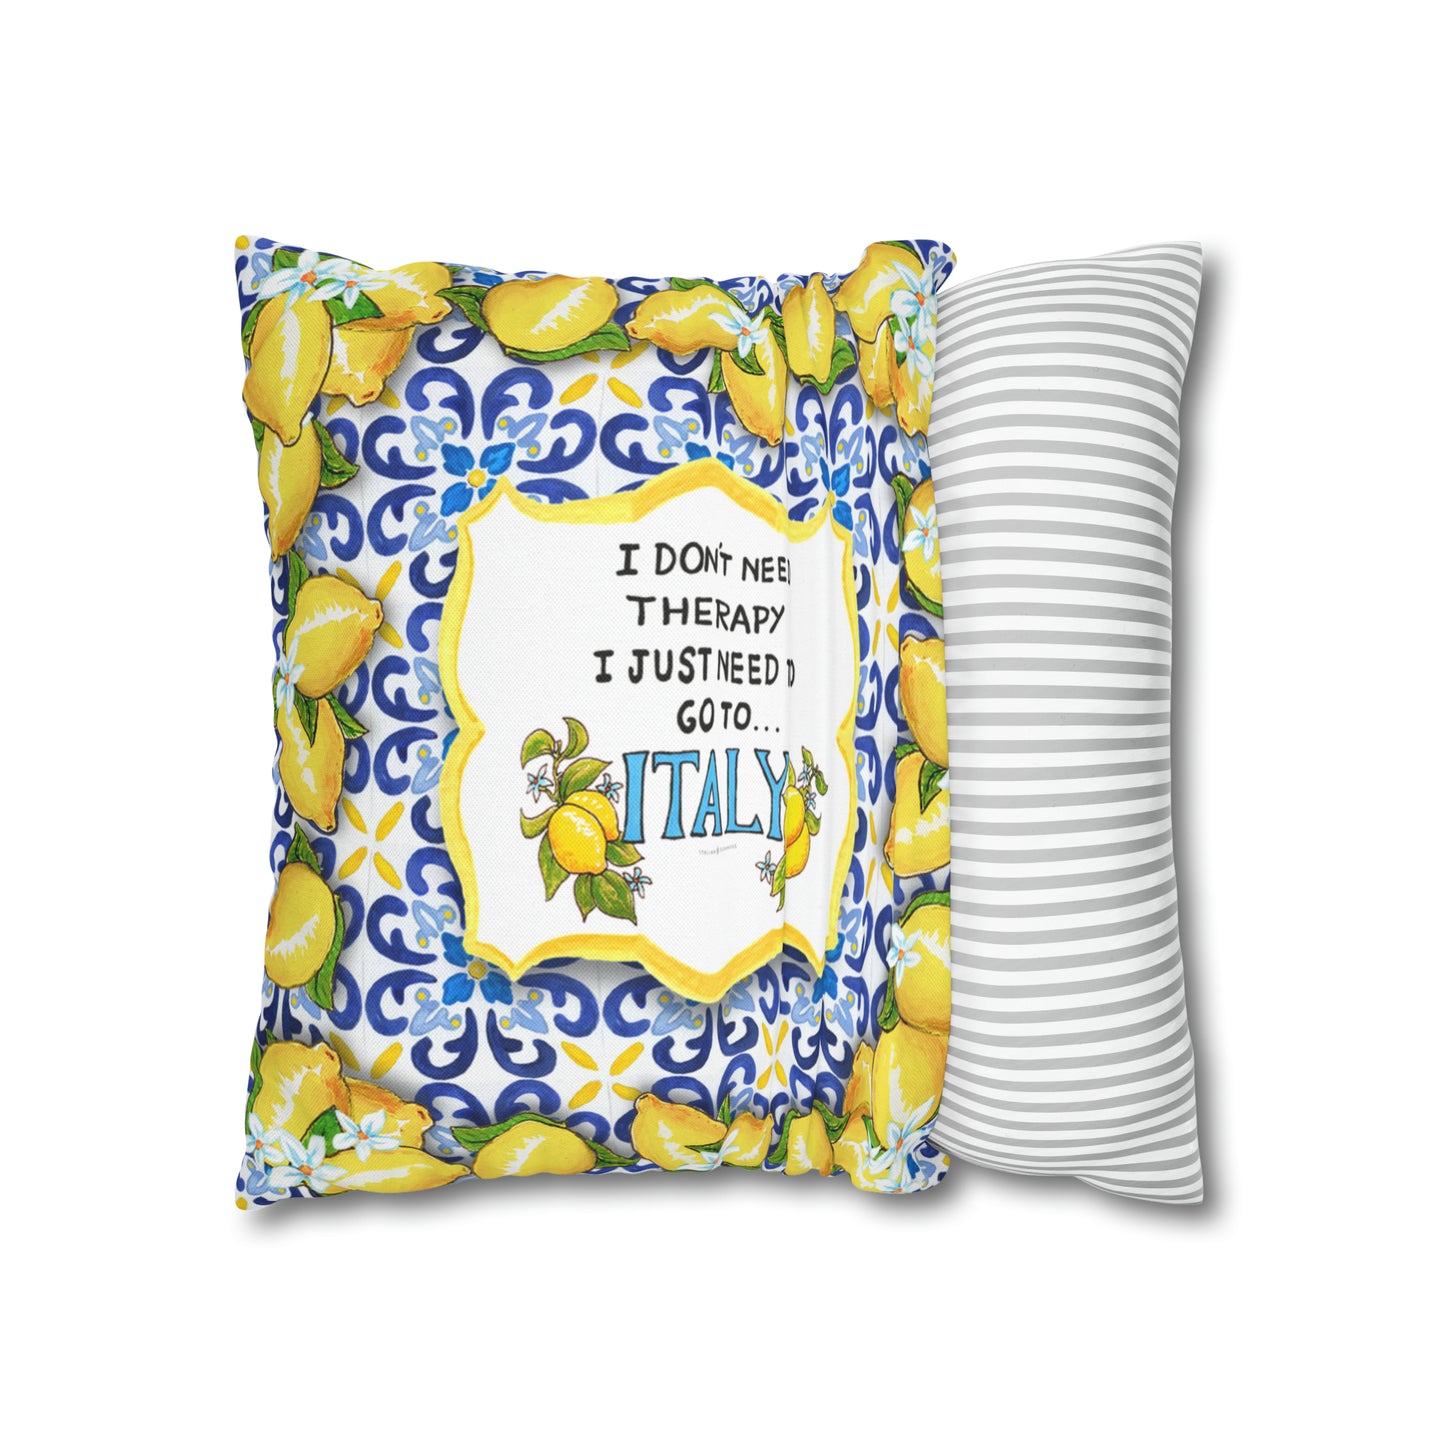 Pillow "I don't need therapy, I just need to go to Italy"! On this pillow the quote is decorated with  a border of Amalfi lemons, which is traditionally associated with sunshine, good luck and good health.